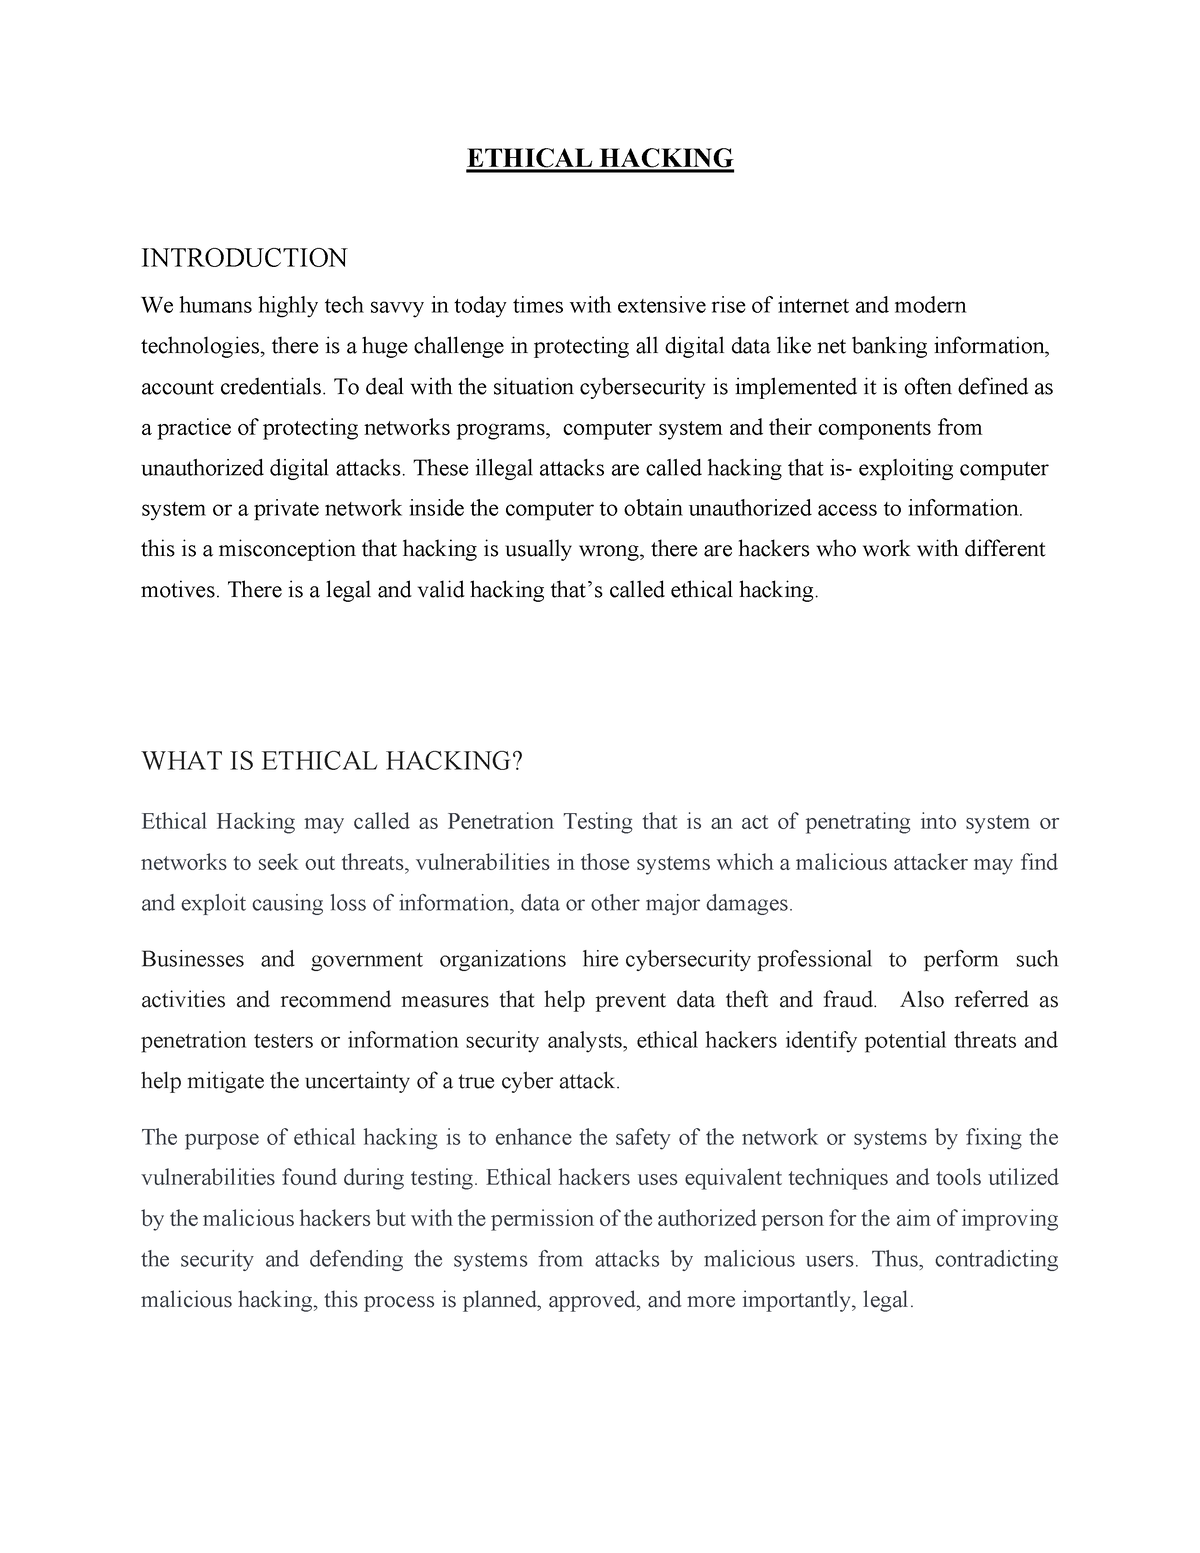 conclusion ethical hacking essay